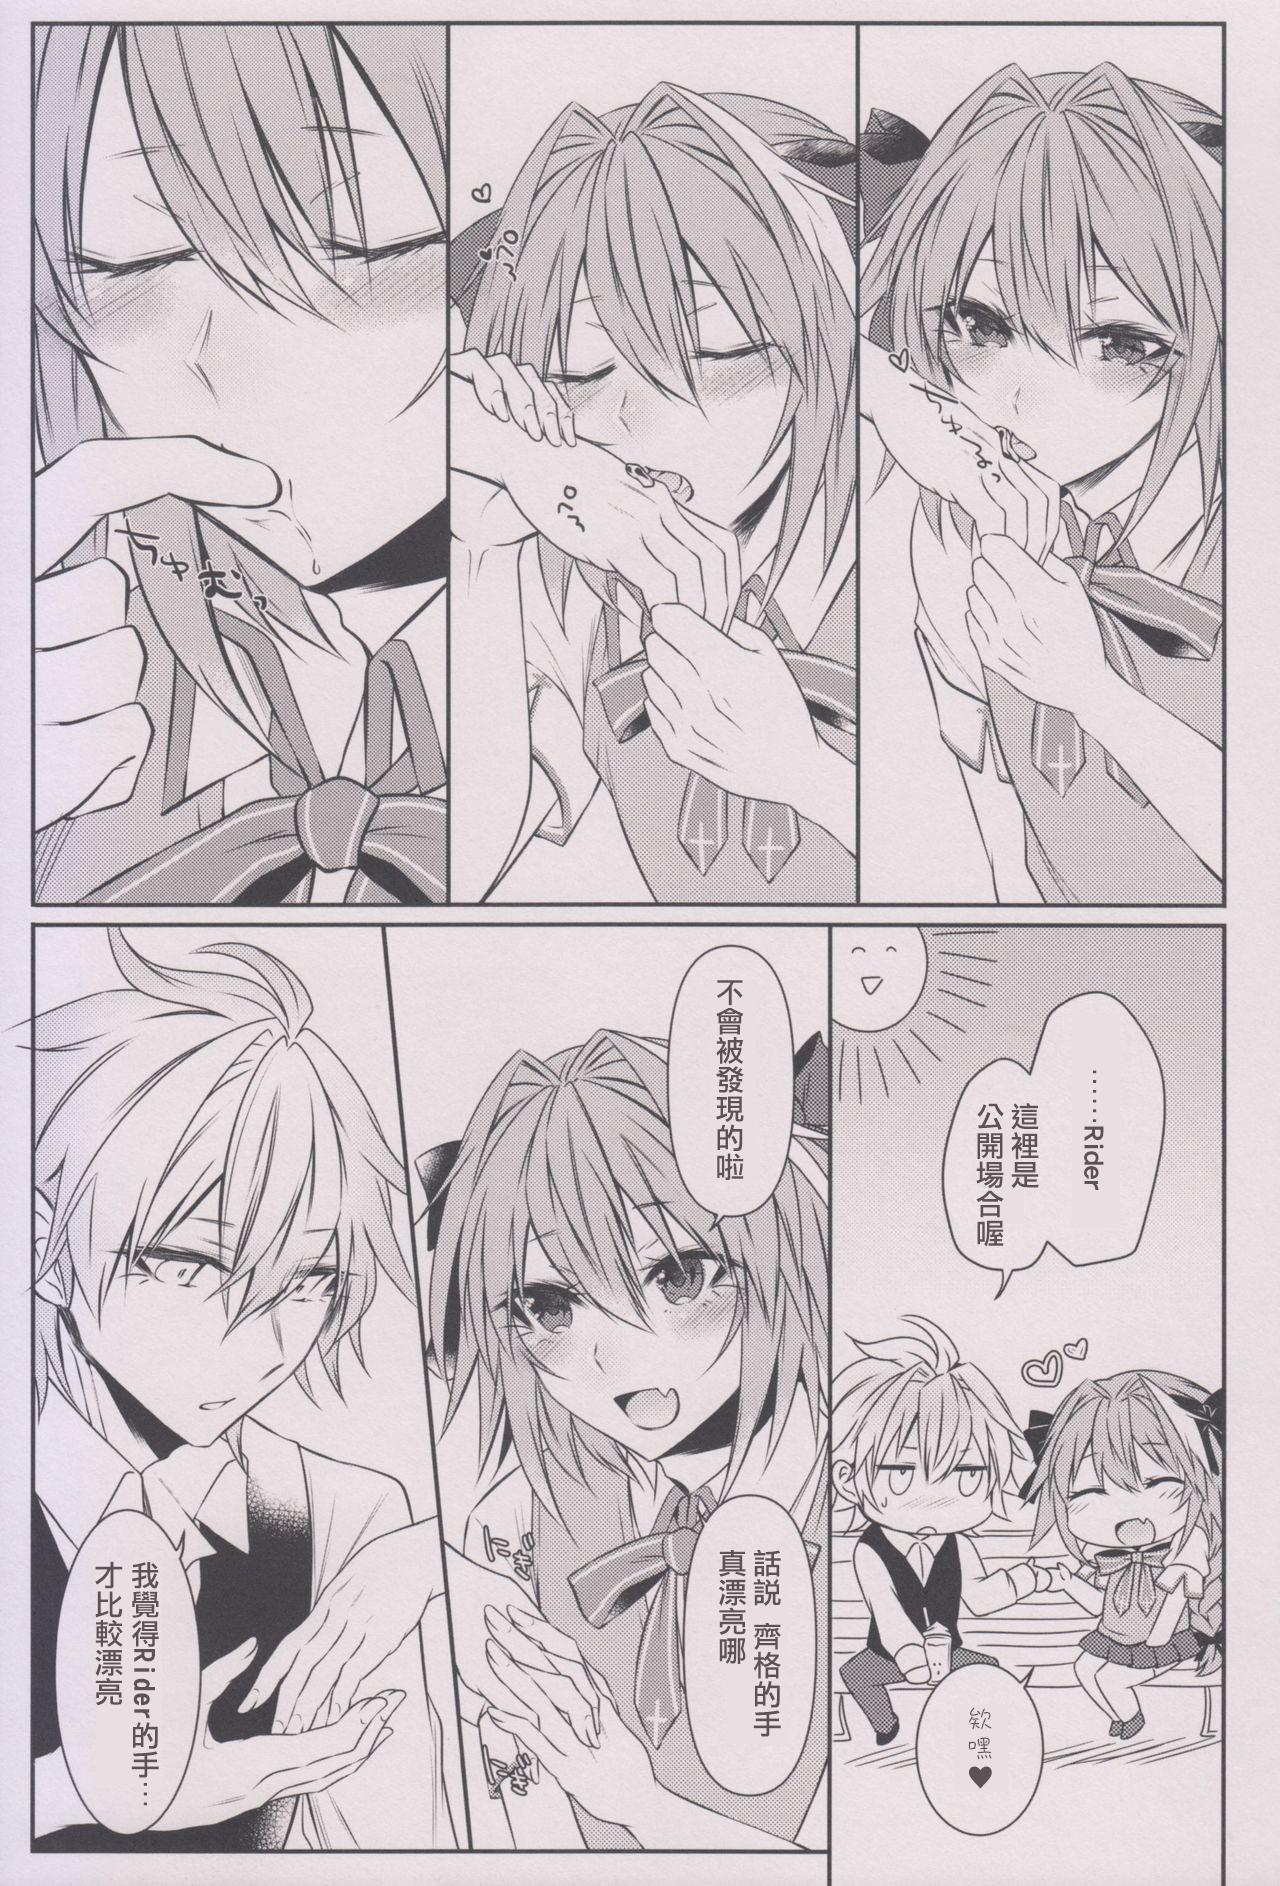 Food Houkago no Astolfo-kun!! - Fate grand order Abuse - Page 7